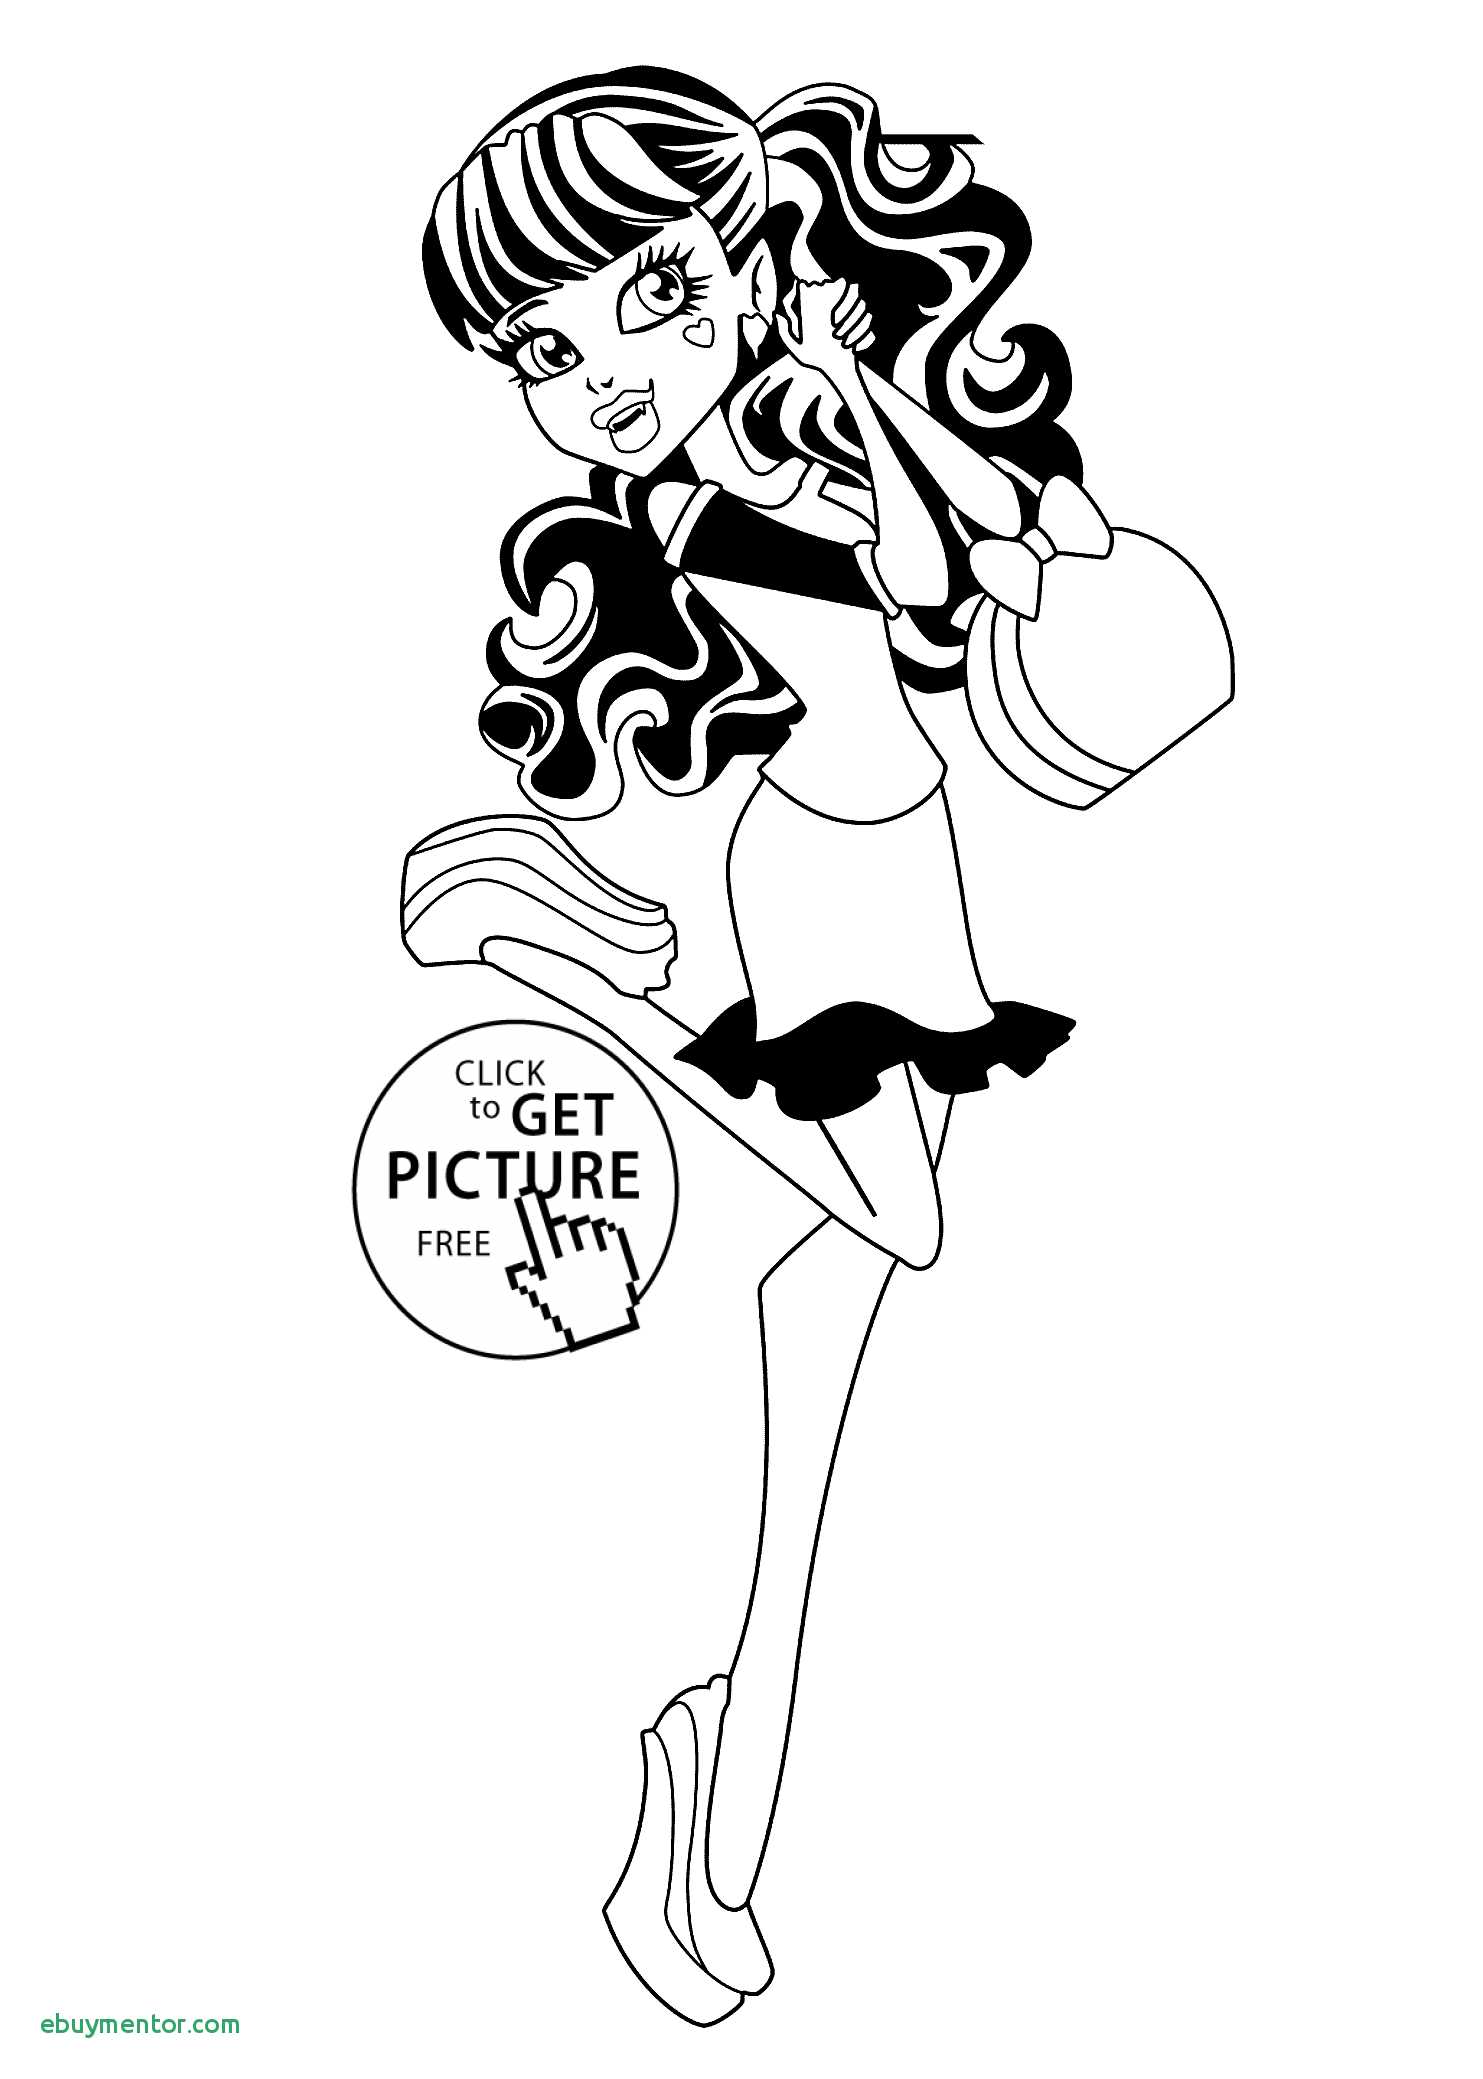 Collection of 'Monster high draculaura drawing'. Download